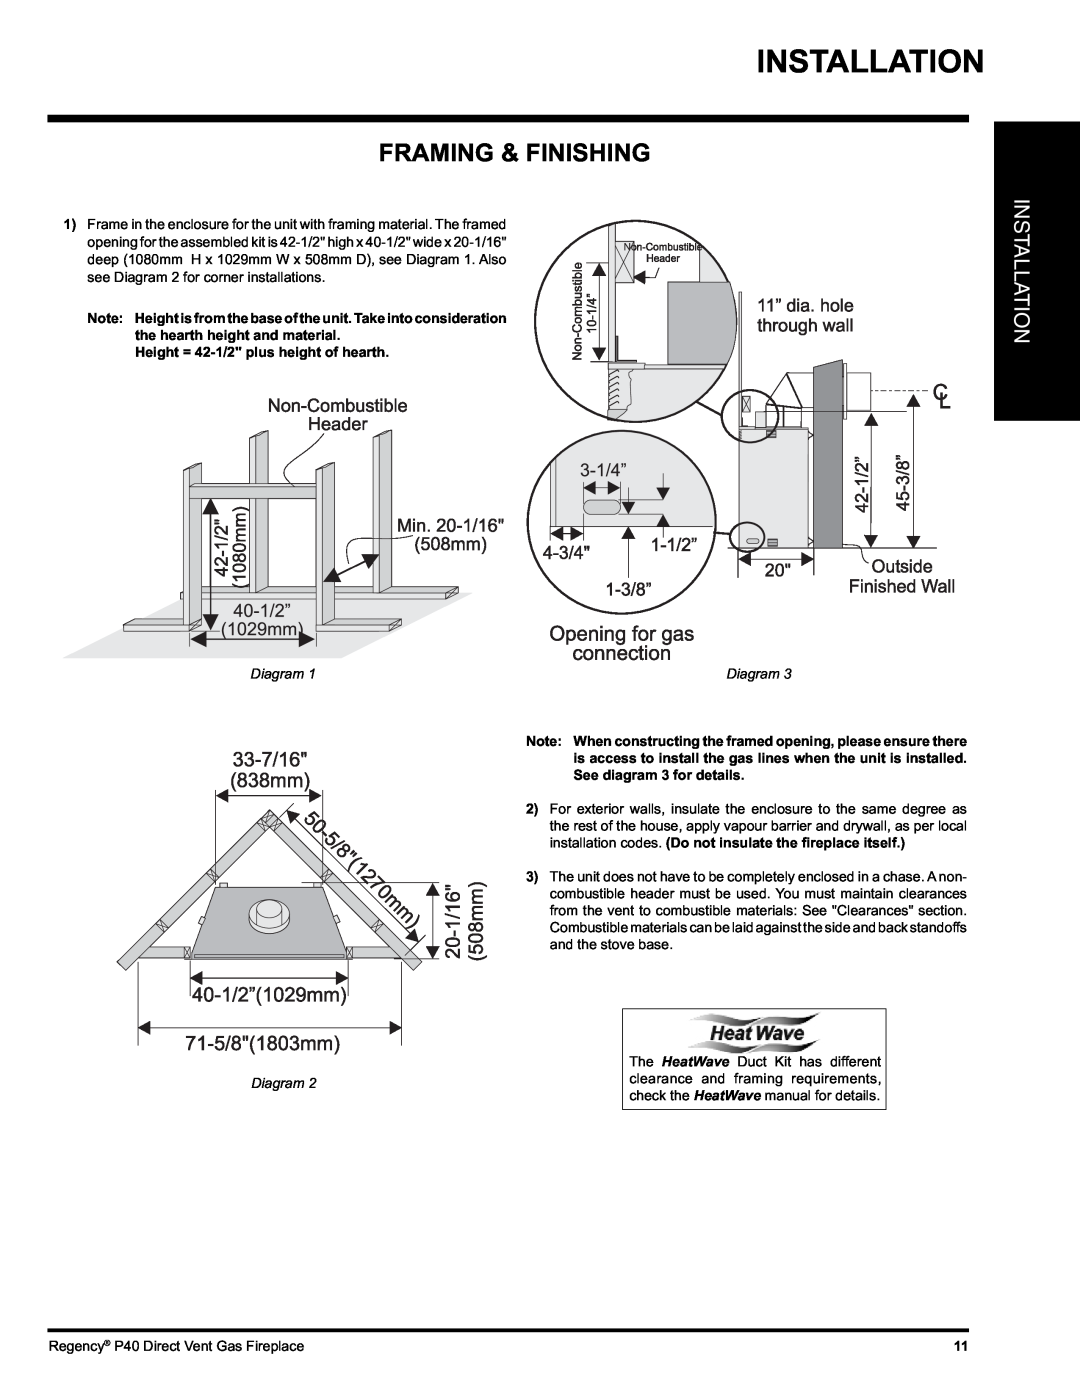 Regency P40-NG, P40-LP Framing & Finishing, Installation, Height = 42-1/2plus height of hearth, Diagram Diagram 